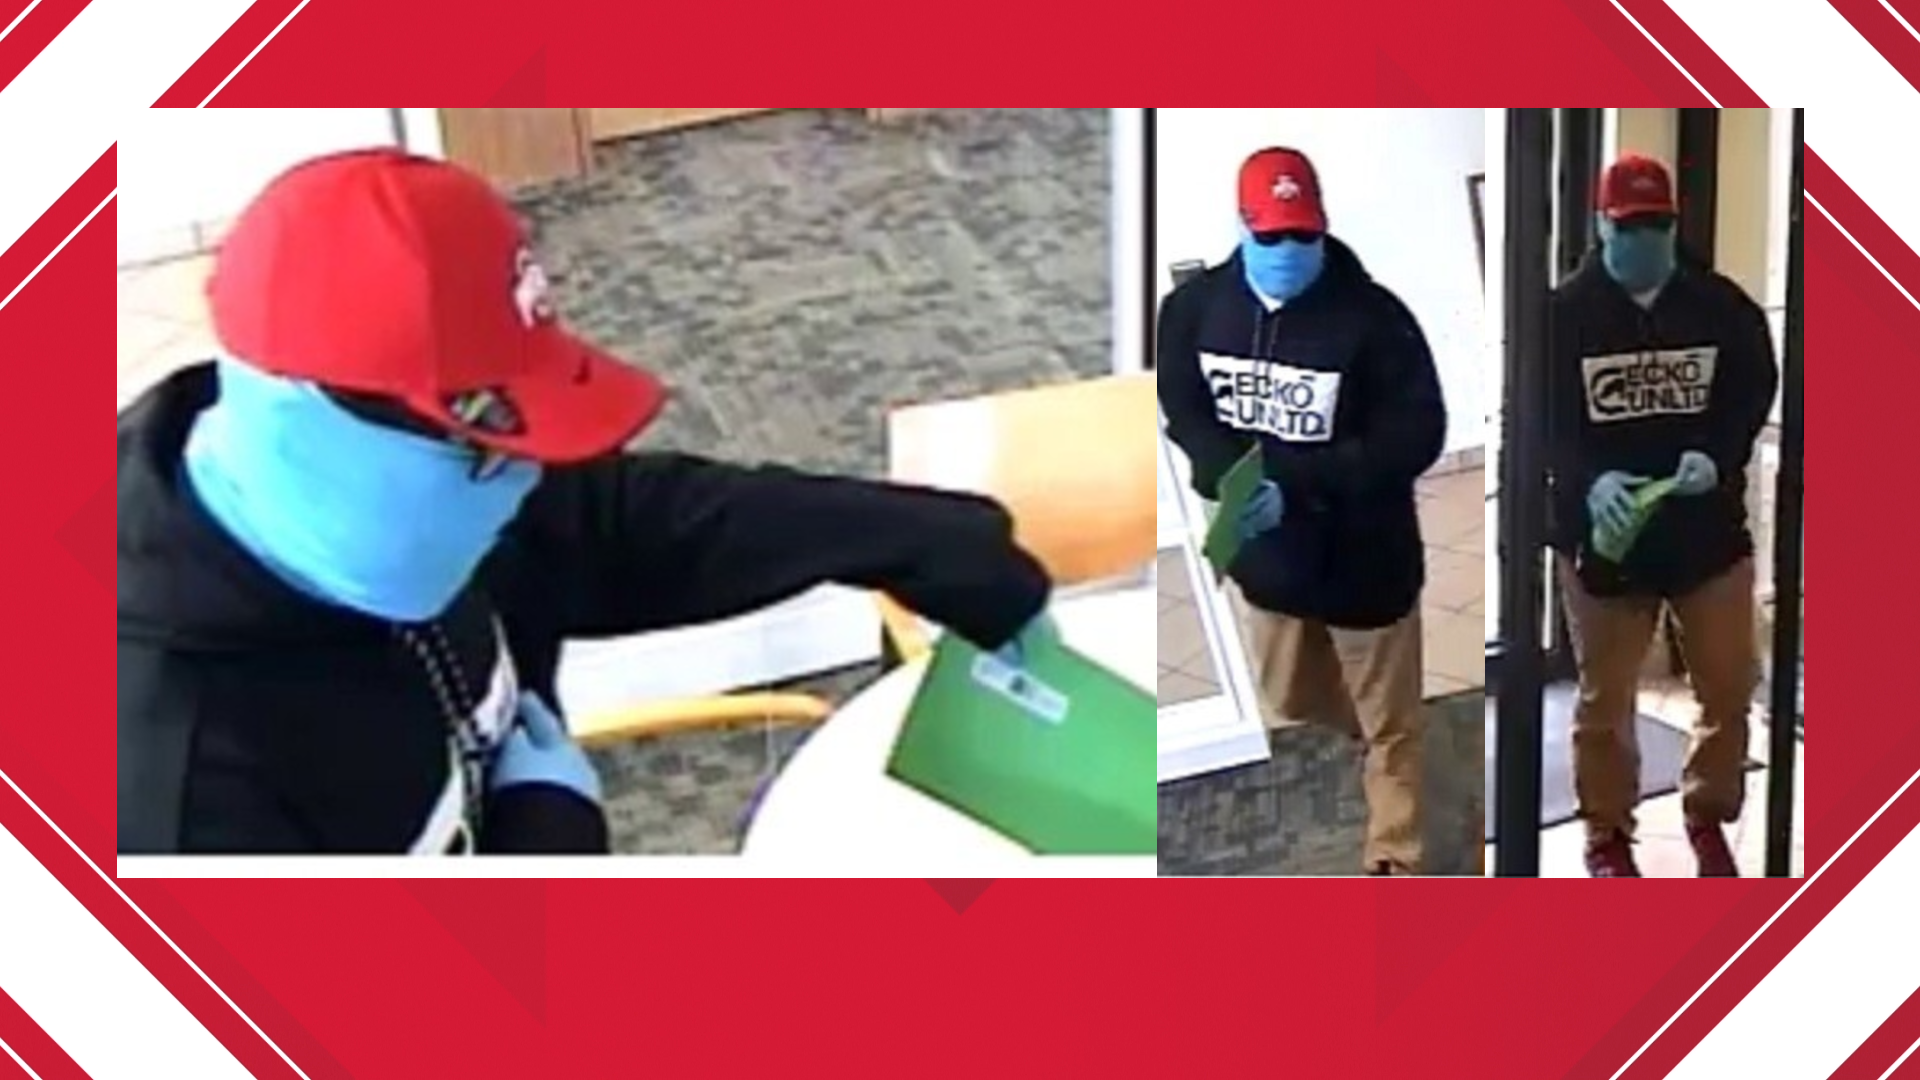 According to the FBI and Perrysburg Twp. police, a man entered the Huntington Bank on Oregon Rd. in Perrysburg, brandished a gun and fled the scene with cash.